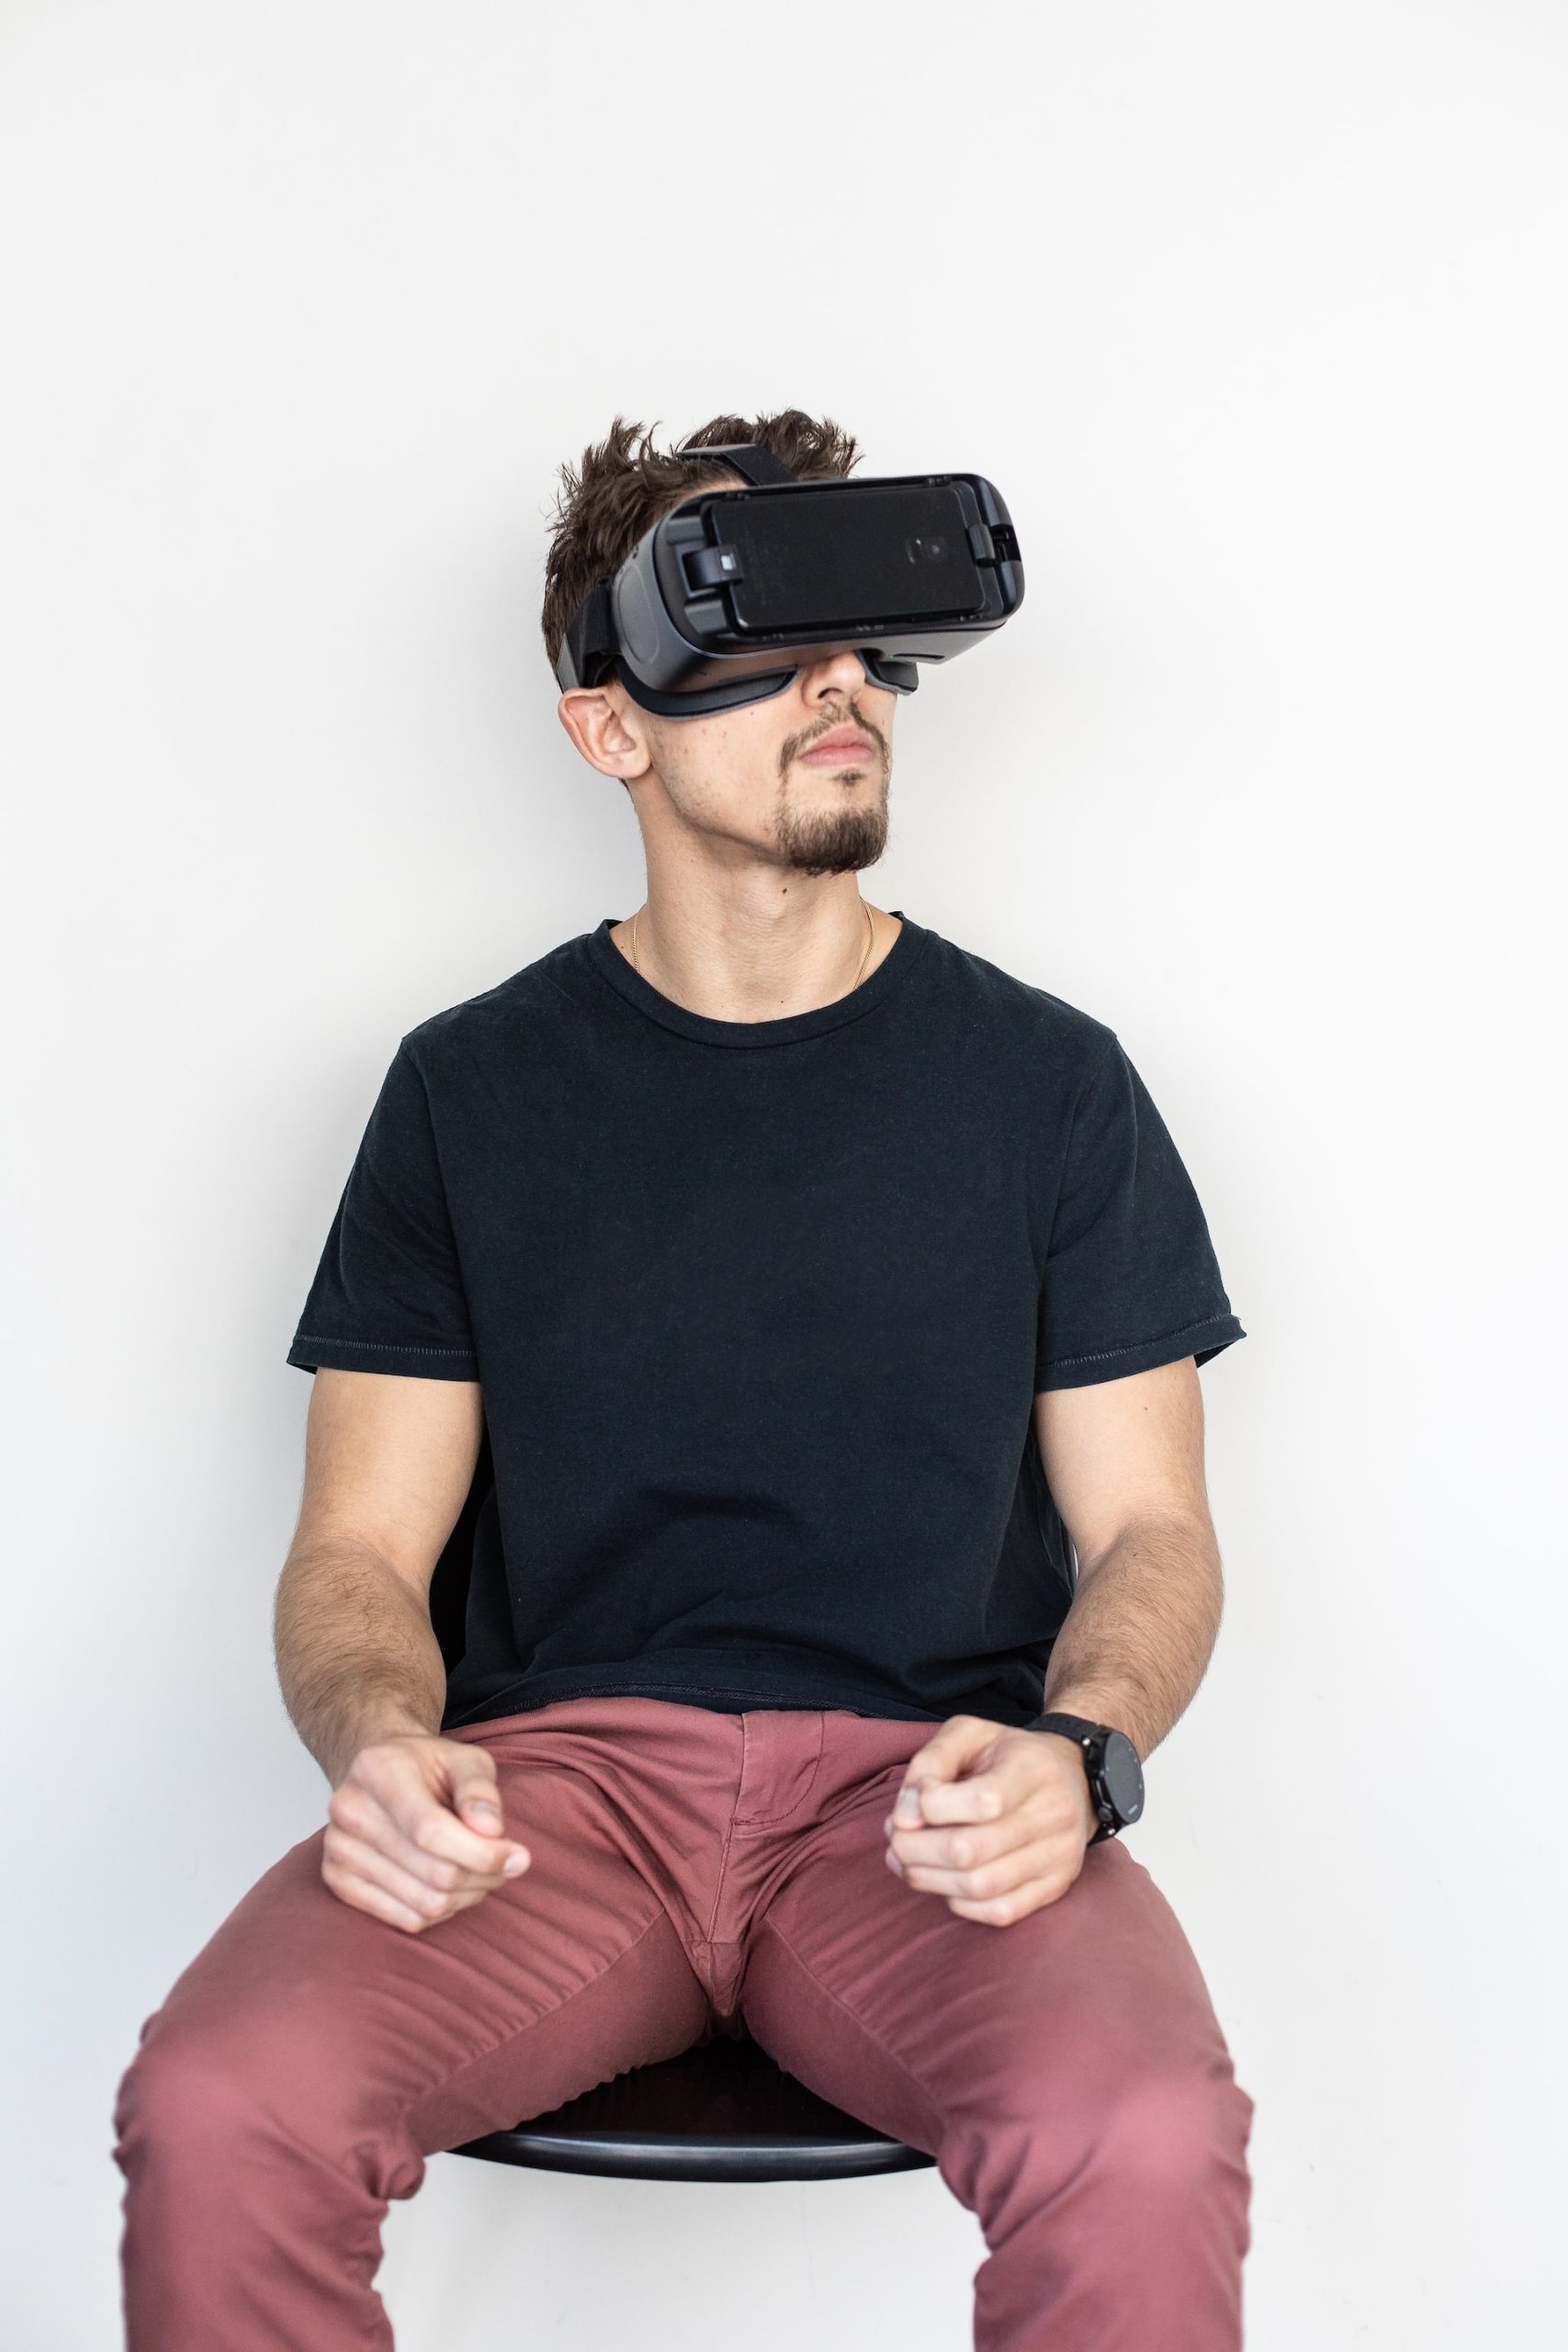 how to watch virtual reality without headset